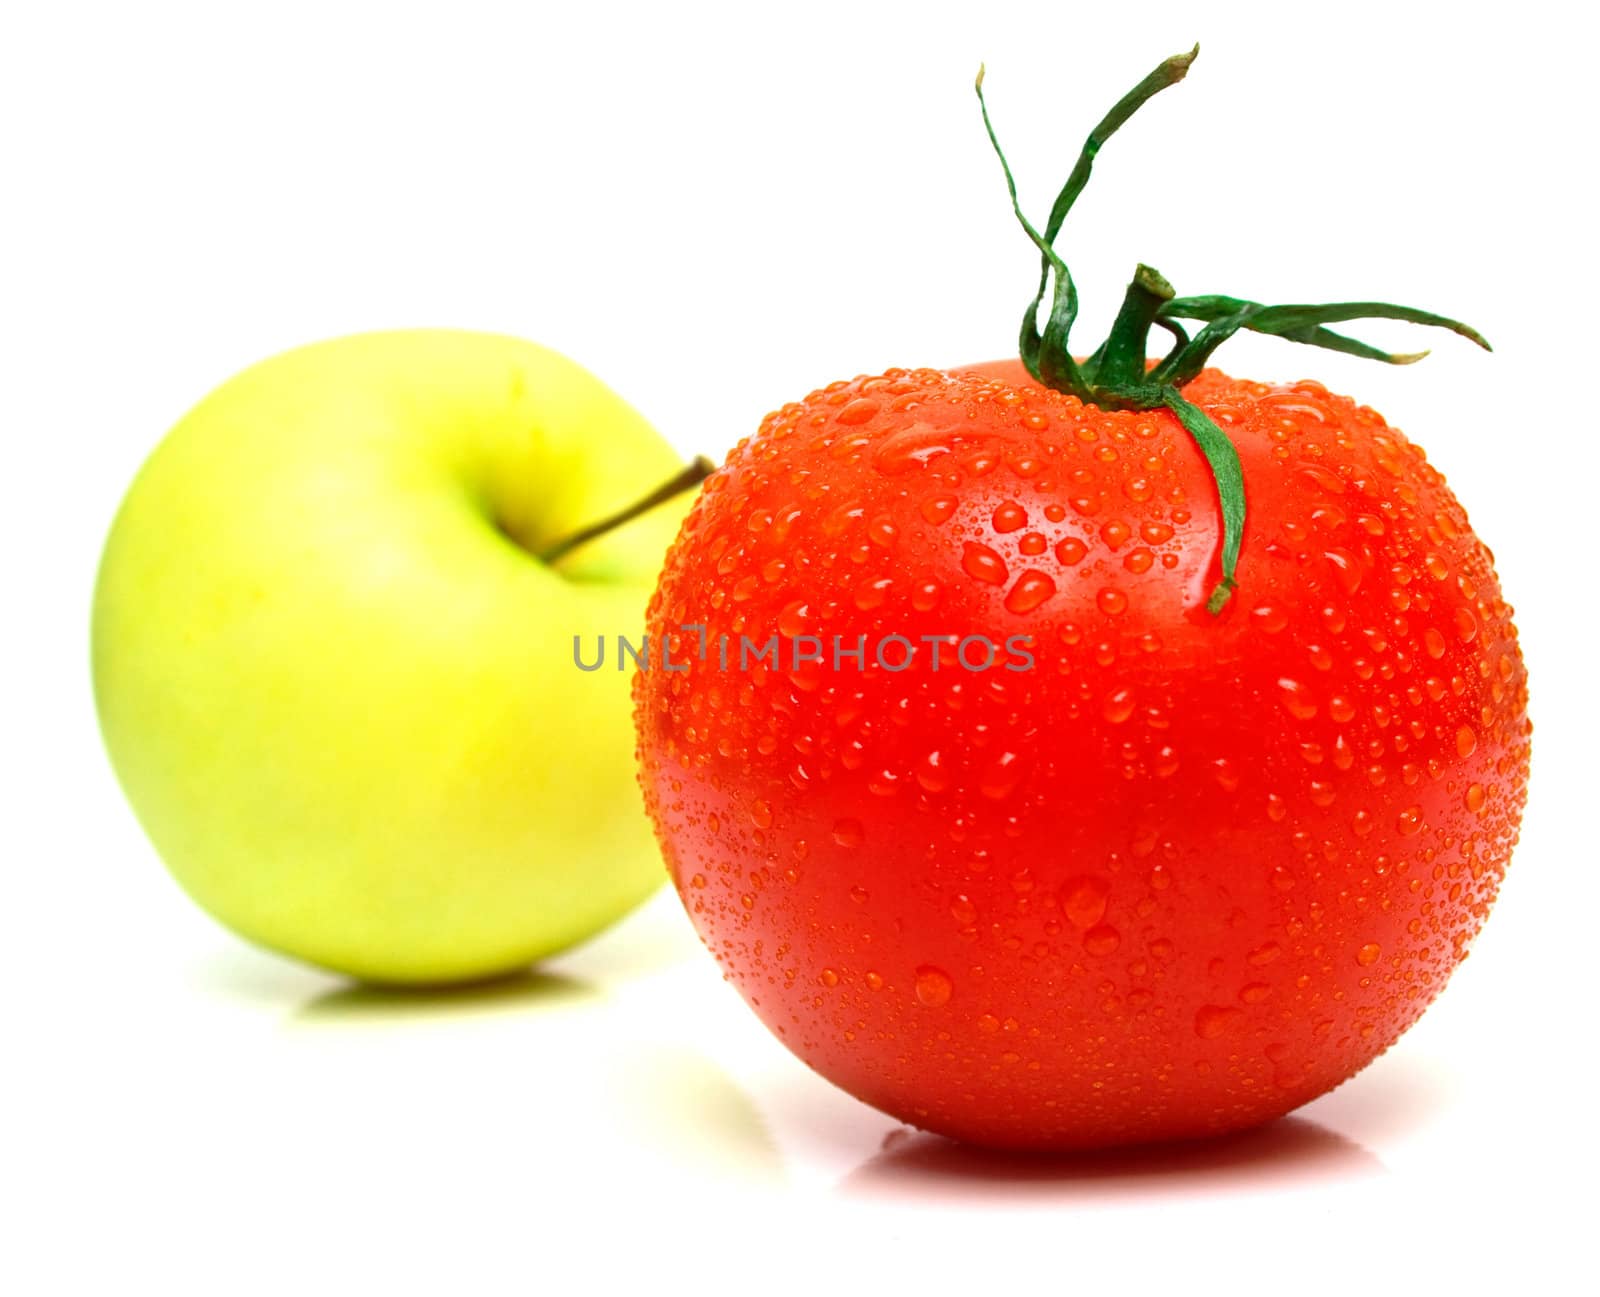 Yellow apple and tomato. Shallow DOF. Focus on a red tomato.